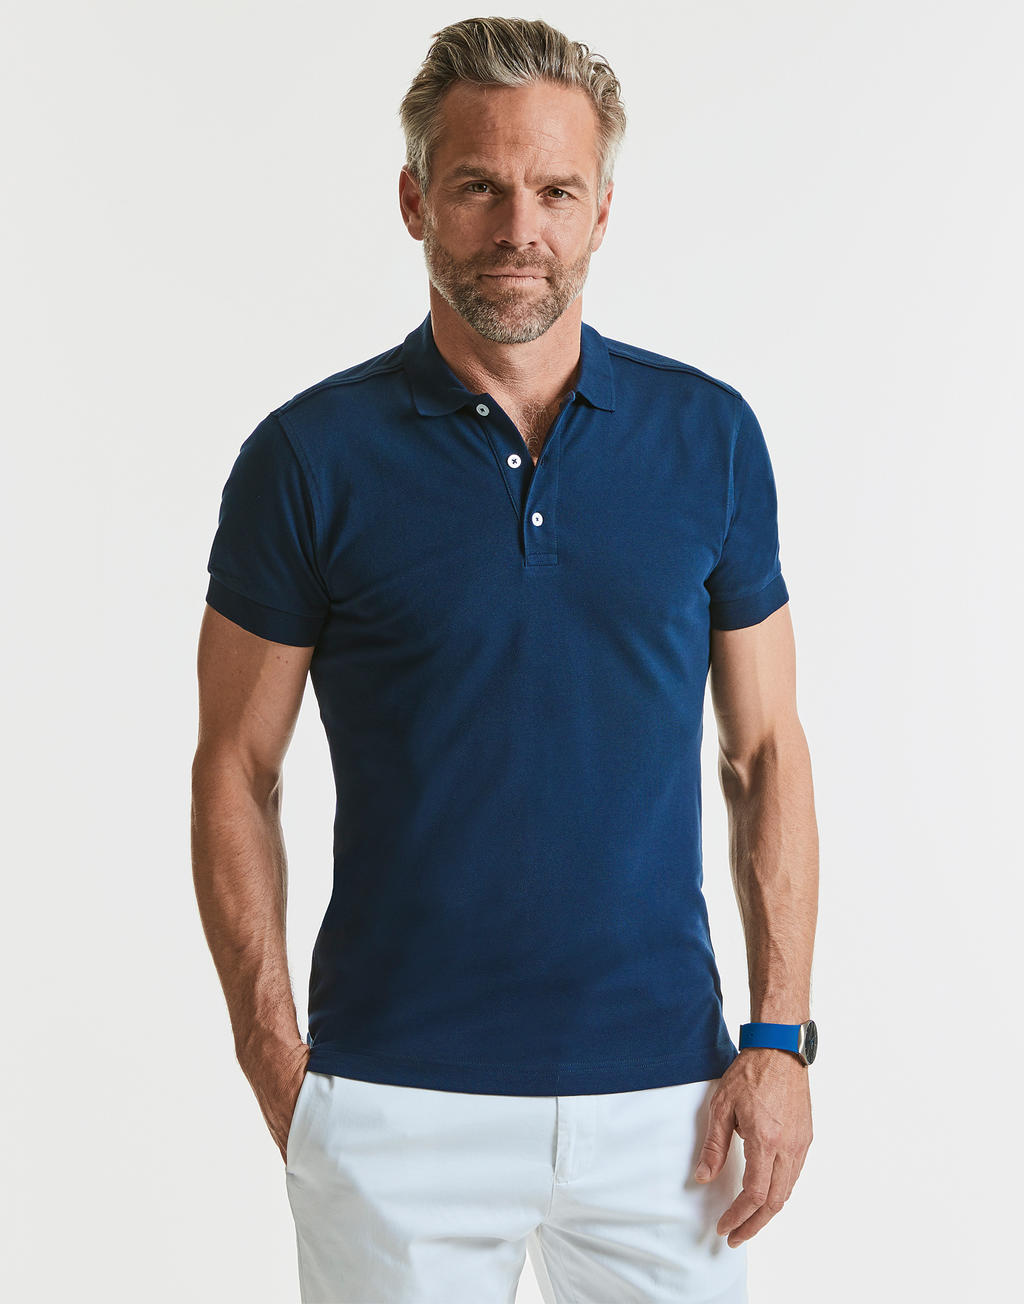  Mens Fitted Stretch Polo in Farbe White